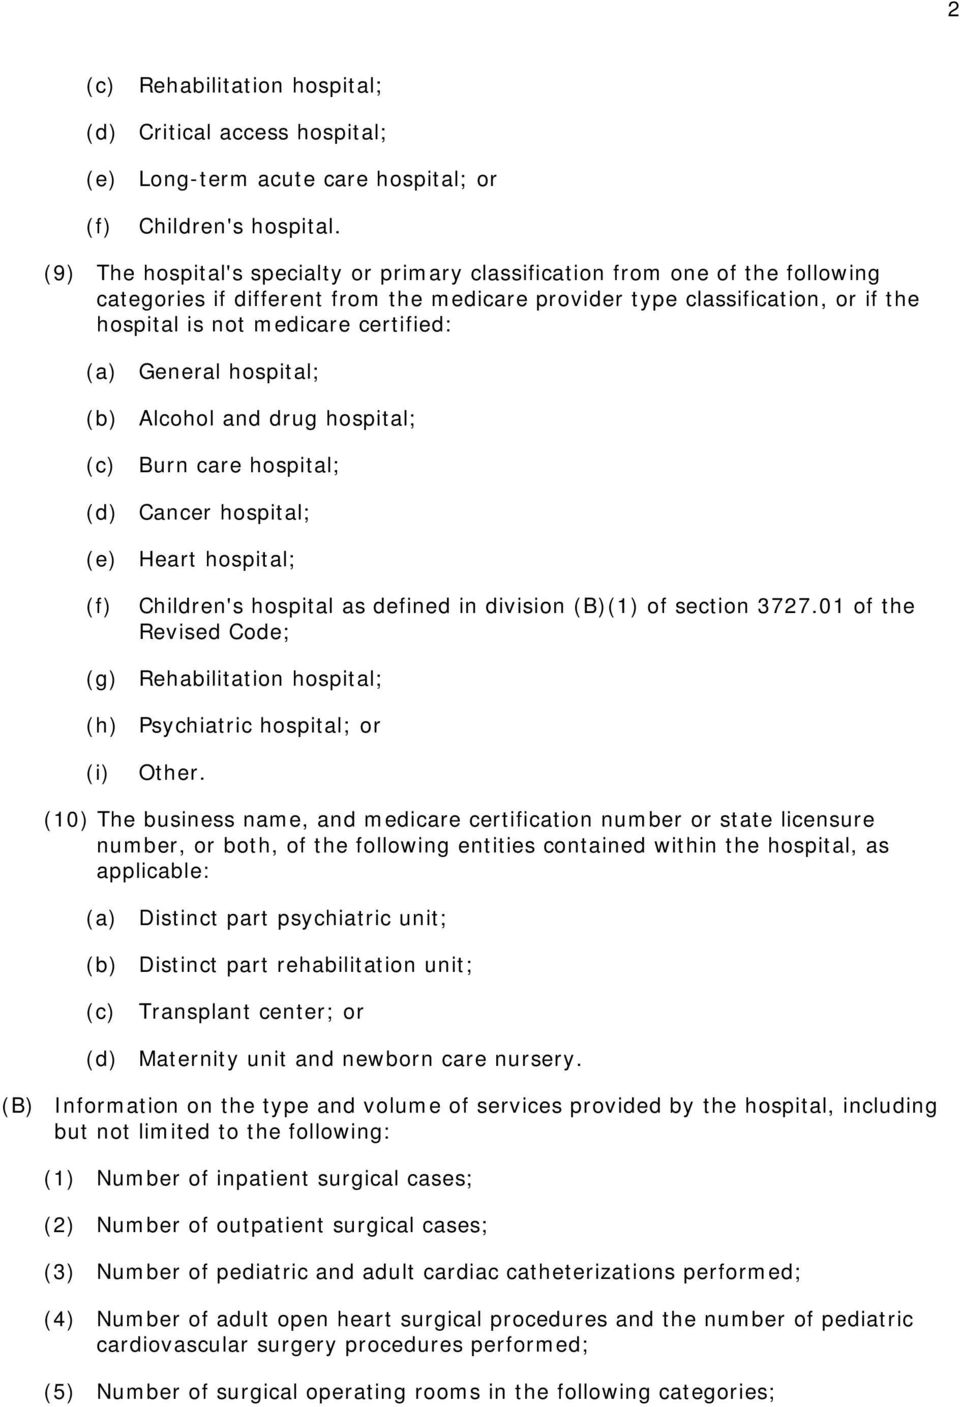 (a) General hospital; (b) Alcohol and drug hospital; (c) Burn care hospital; (d) Cancer hospital; (e) Heart hospital; (f) Children's hospital as defined in division (B)(1) of section 3727.